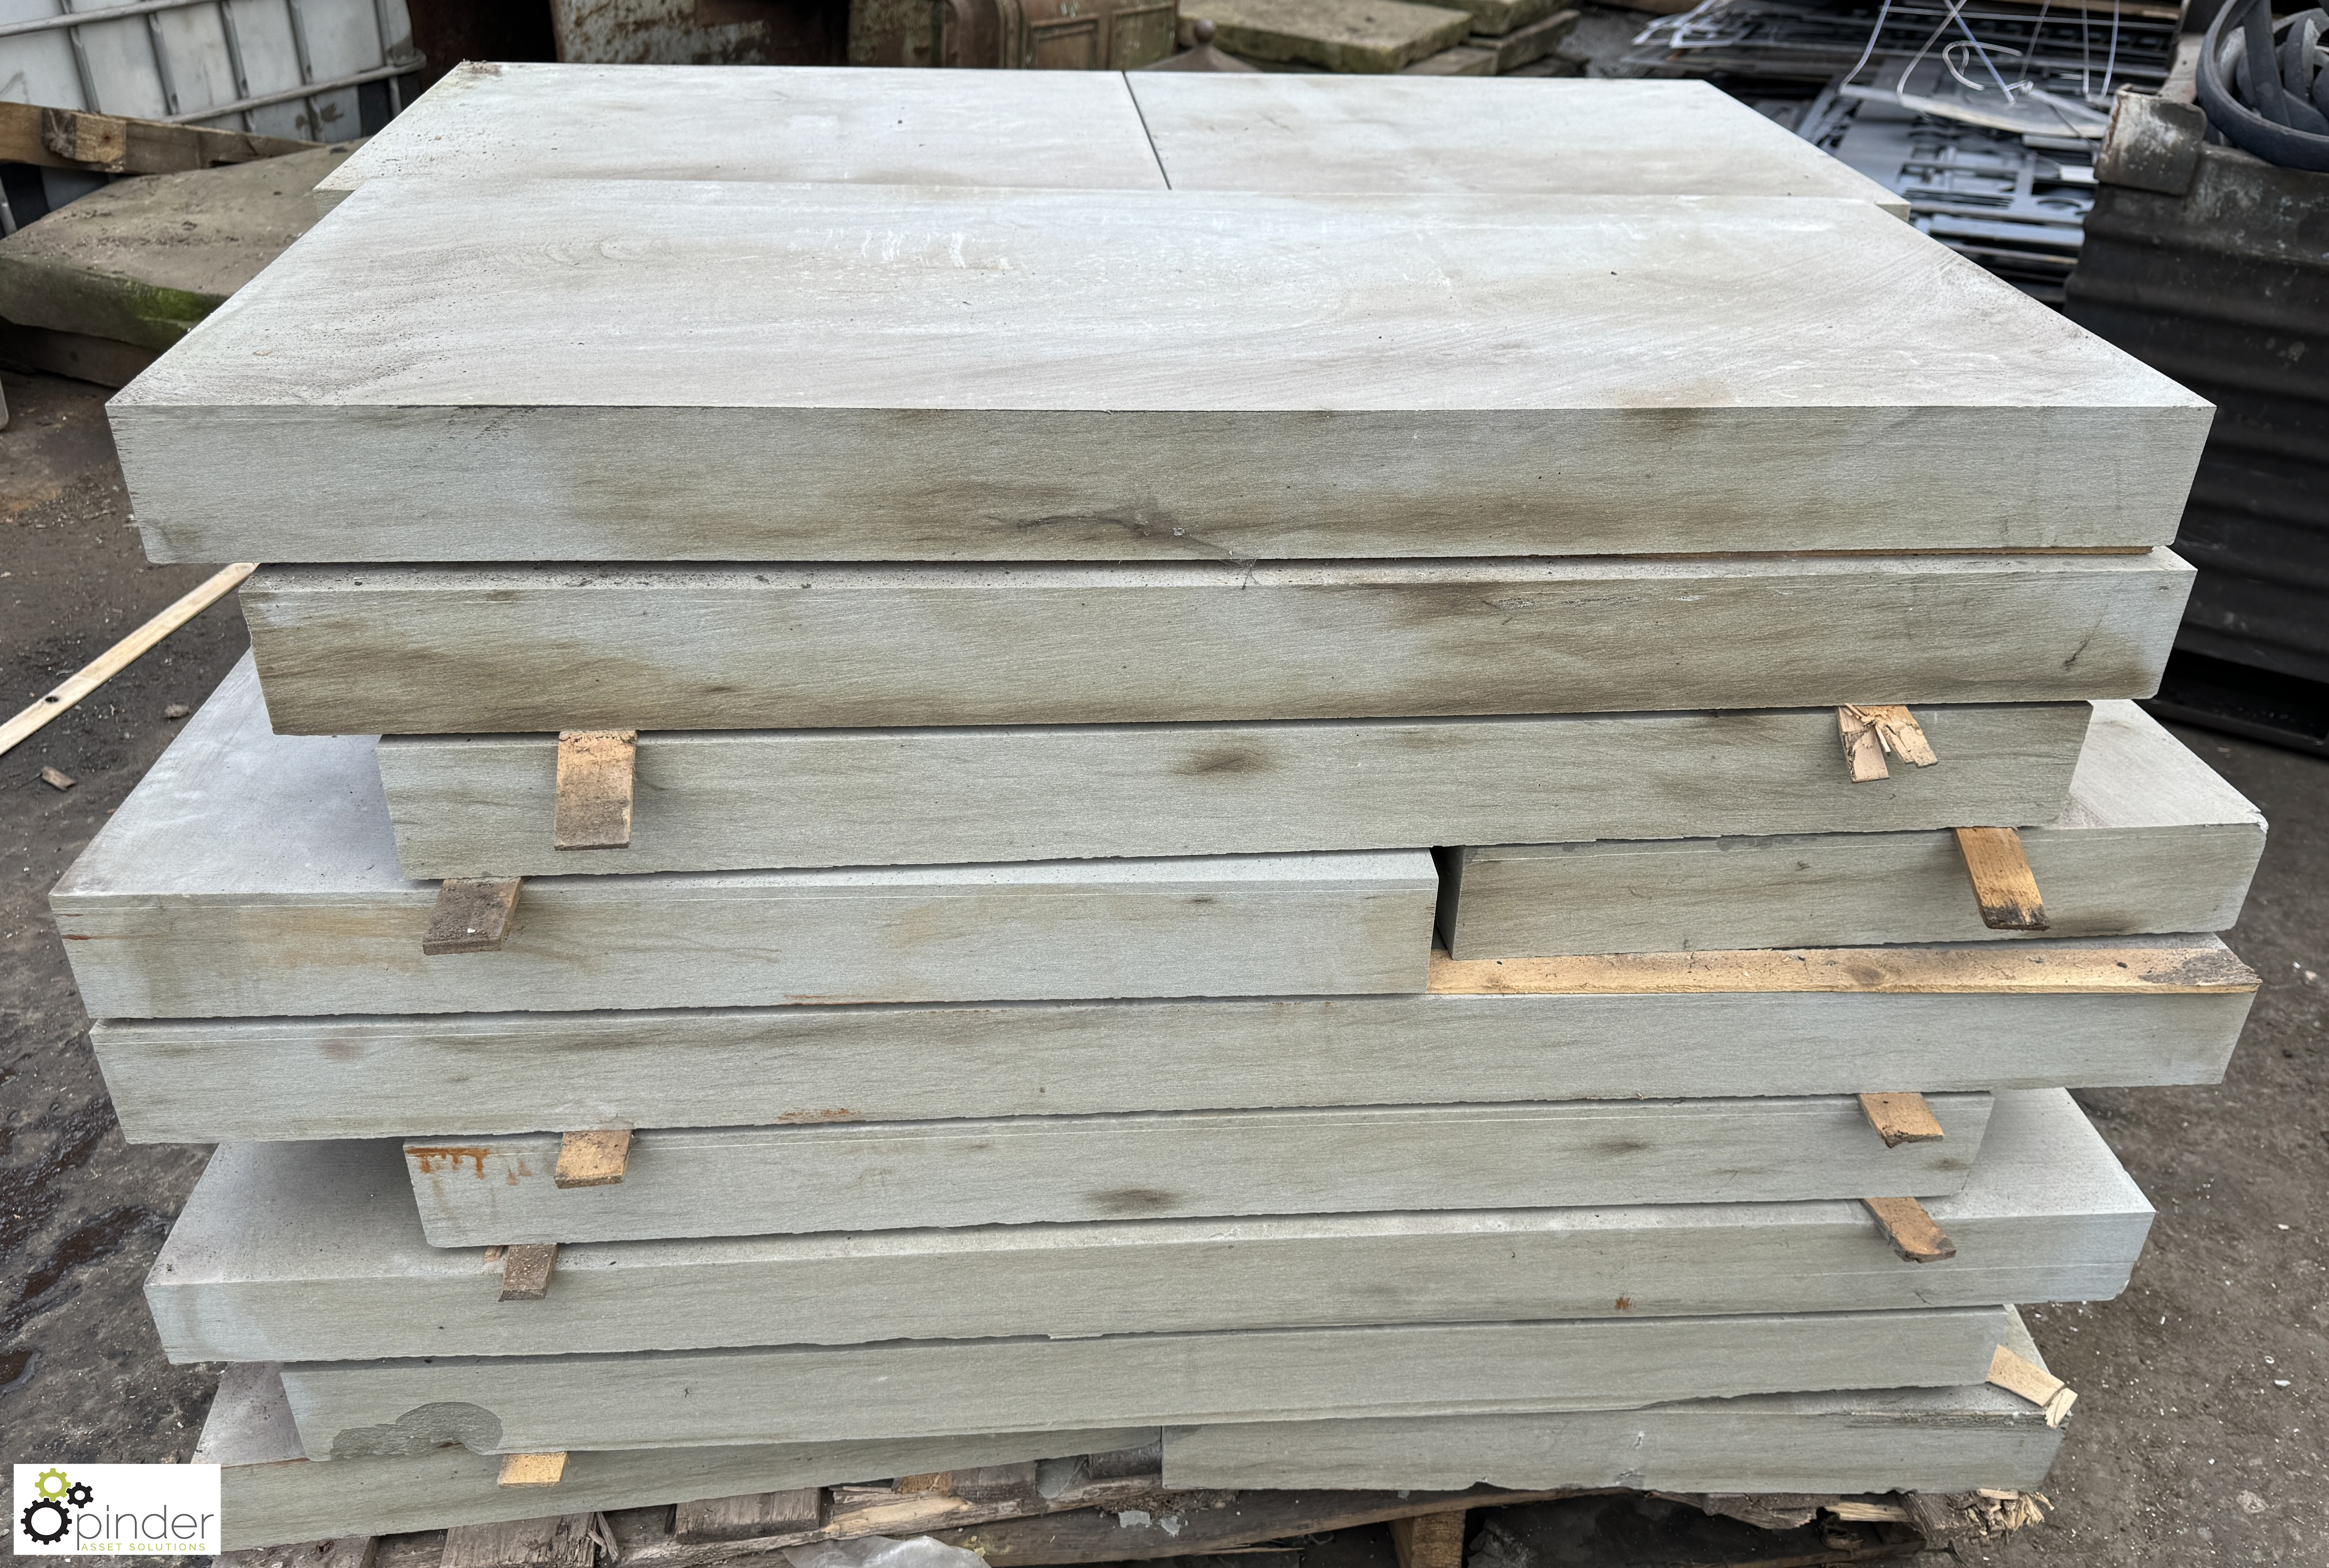 Pallet Sandstone Slabs from Millstone grit, various lengths x 450mm x 75mm - Image 4 of 7